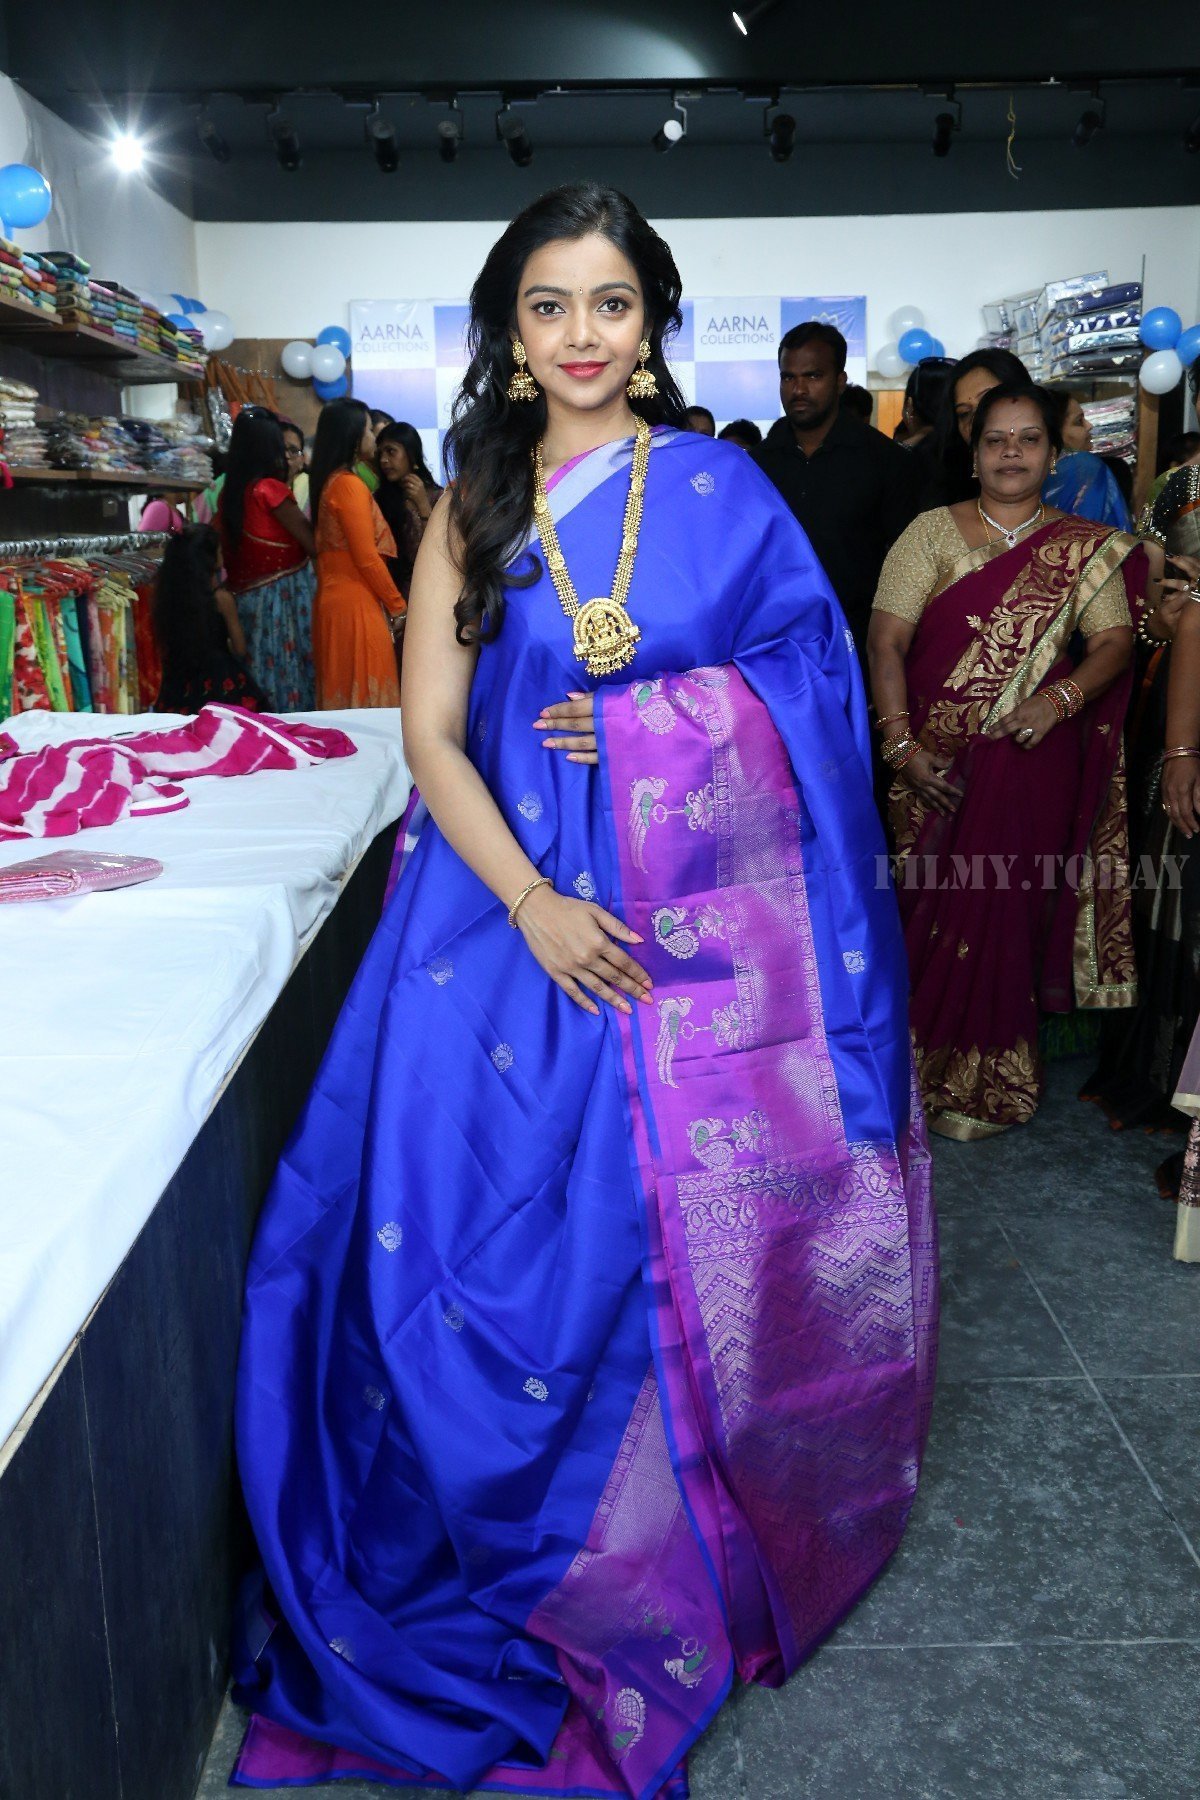 Nithya Shetty - Photos - Inauguration Of Aarna Collections at Sanikpuri | Picture 1631740